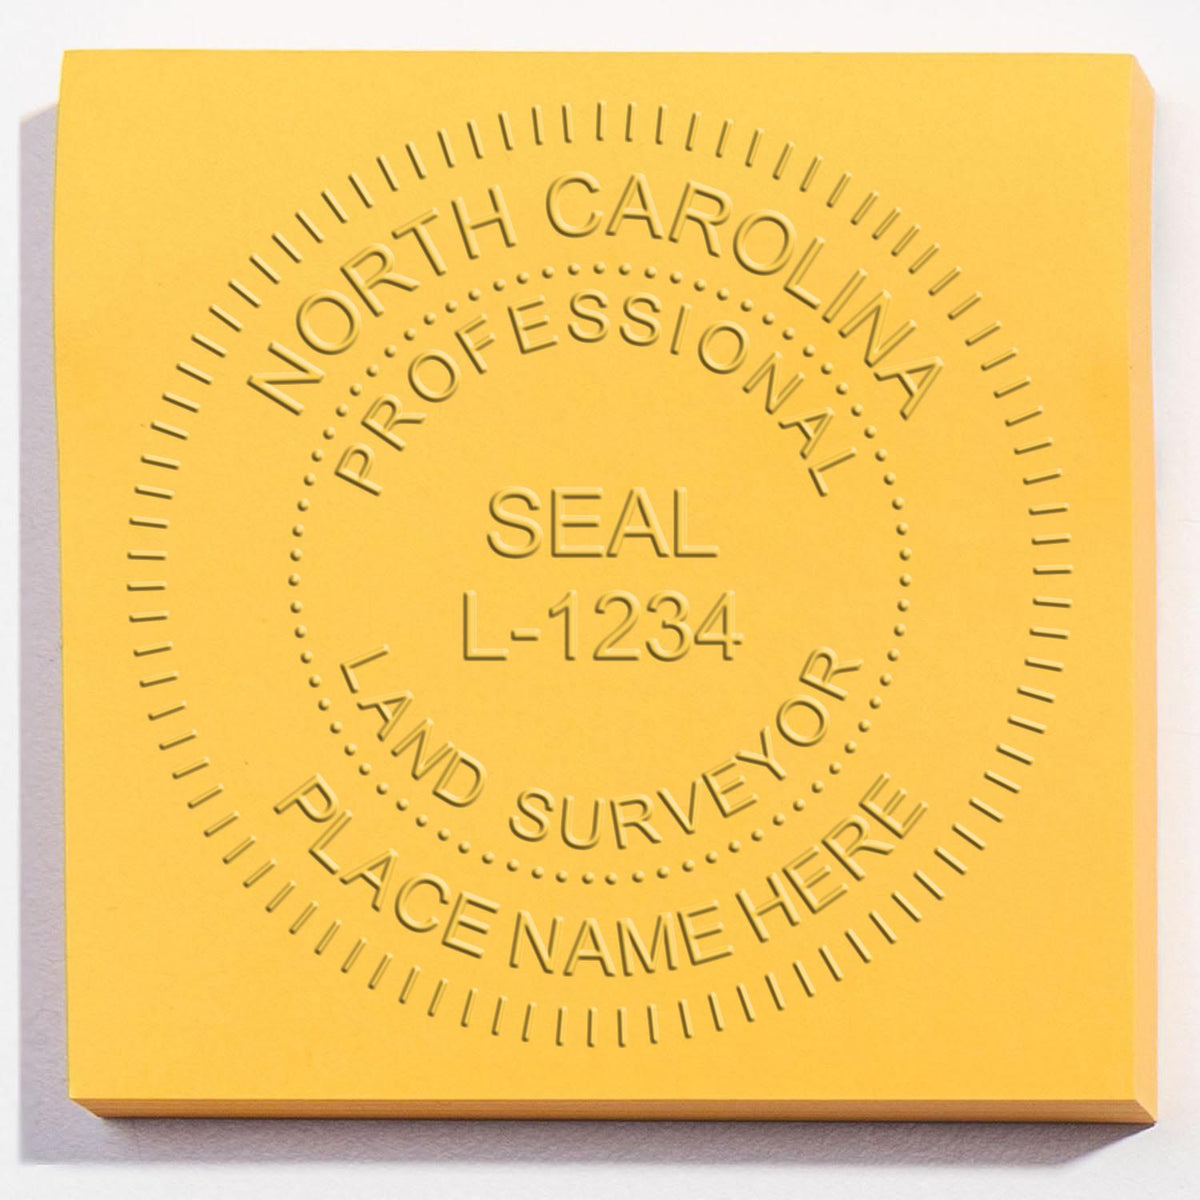 A photograph of the Hybrid North Carolina Land Surveyor Seal stamp impression reveals a vivid, professional image of the on paper.